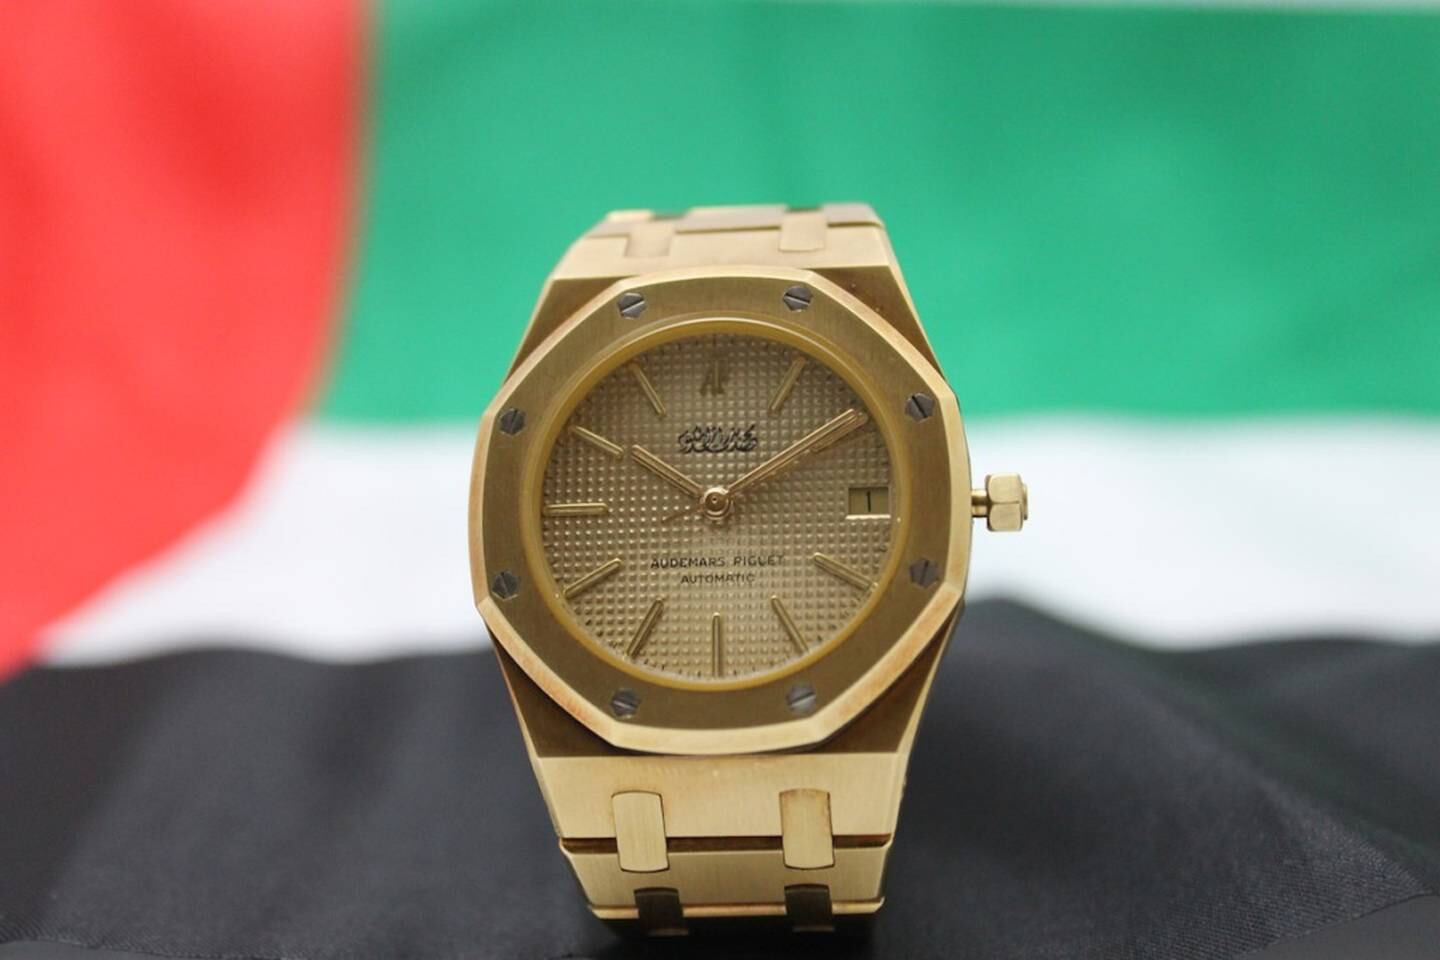 A handout photo of Audemars Piguet Royal Oak in 18k gold, dated early 1980s, which features a tropical dial with the engraving â€˜Mohammed Bin Rashid Al Maktoumâ€™ (in Arabic characters). (Courtesy: Christie's Images) *** Local Caption ***  AL19SE-CROWNS-AUDEMARS.JPG